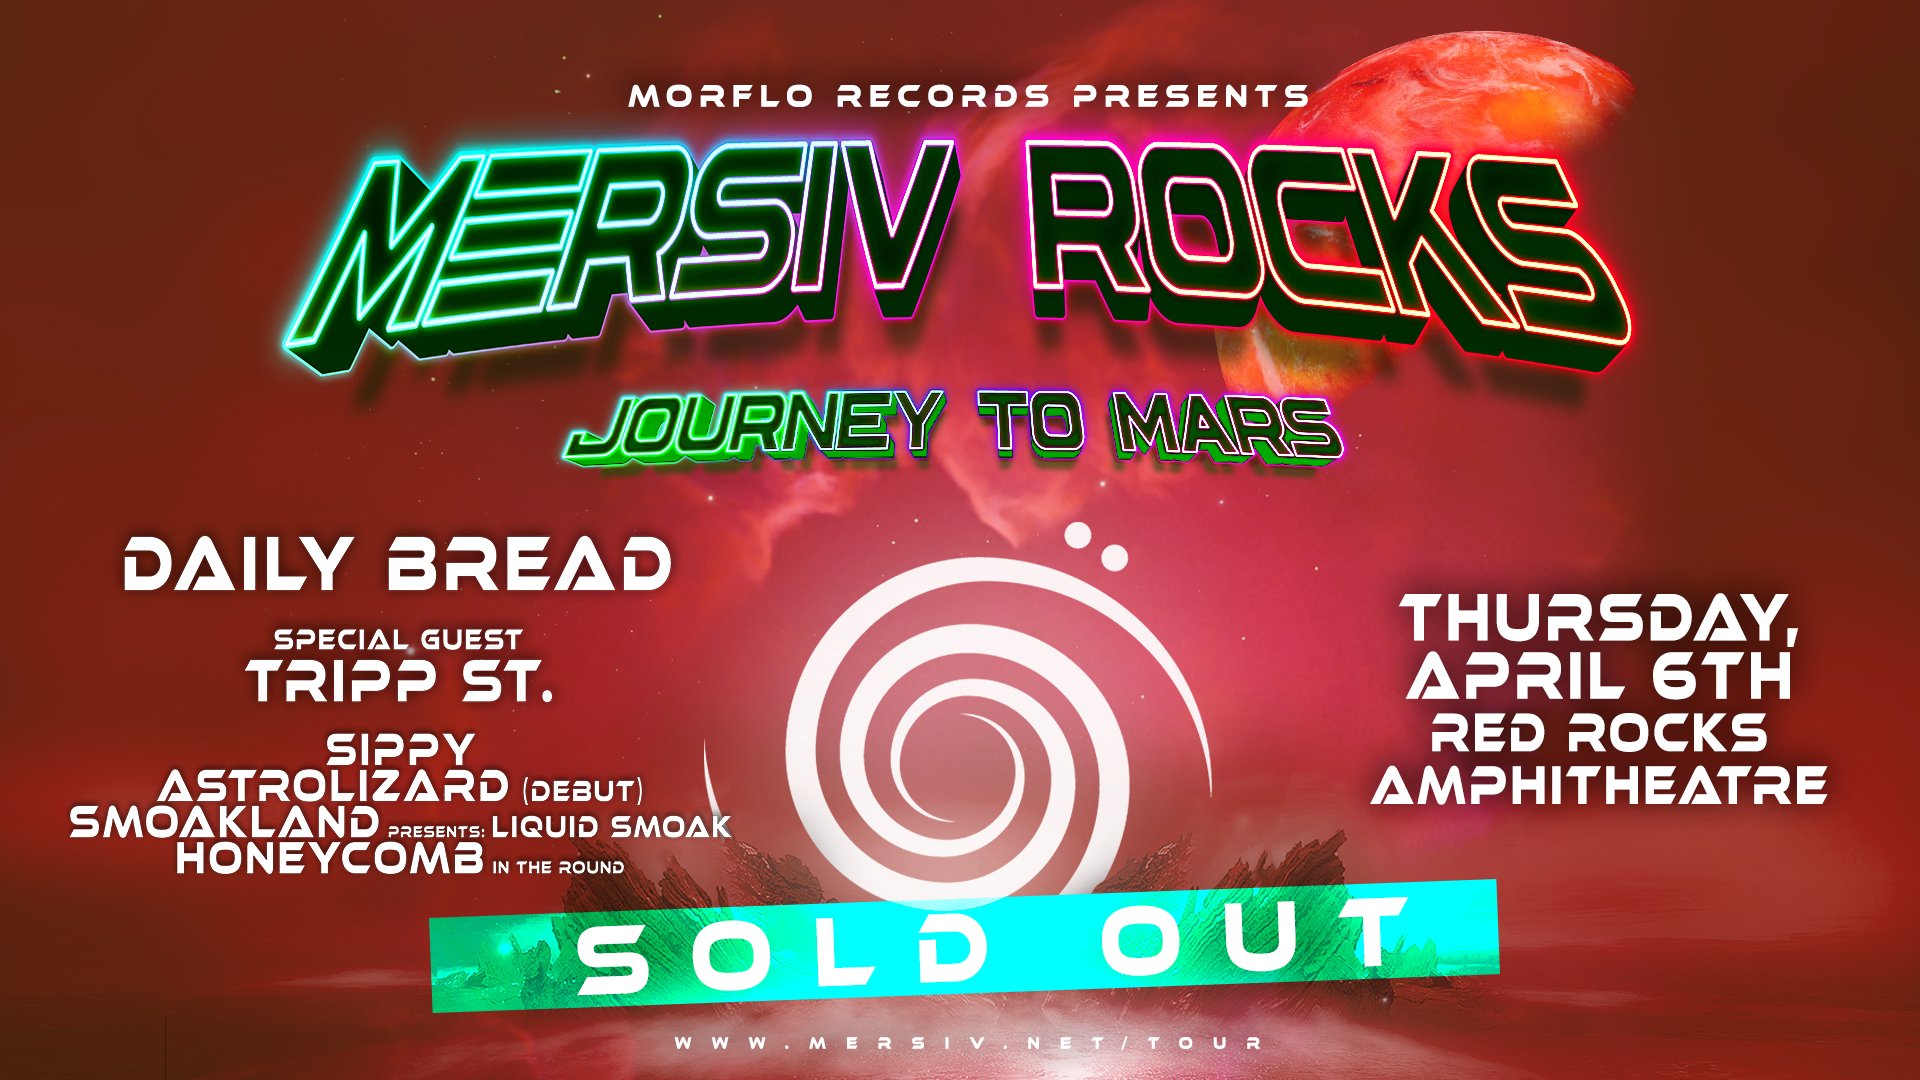 Mersiv Headlines Red Rocks with Stellar Lineup Including Daily Bread